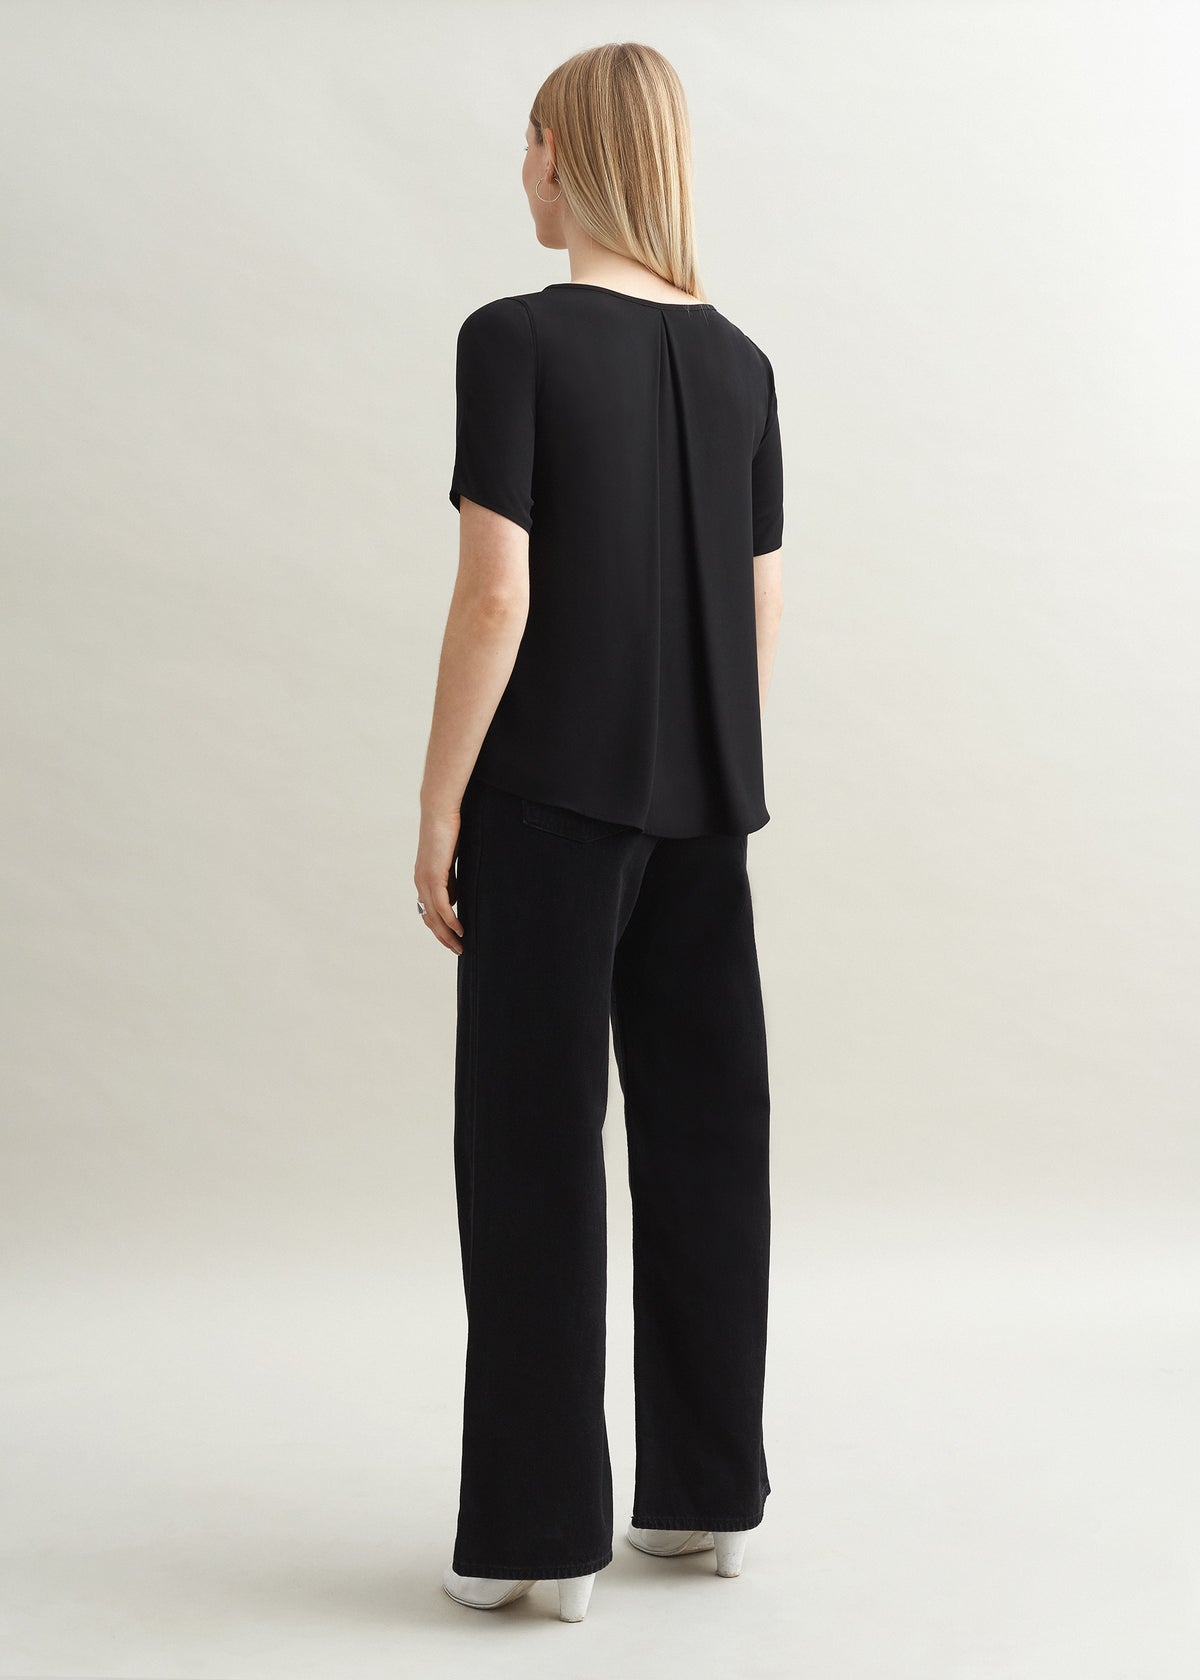 ACTÉE. Blouse with box pleats at the back. Plain